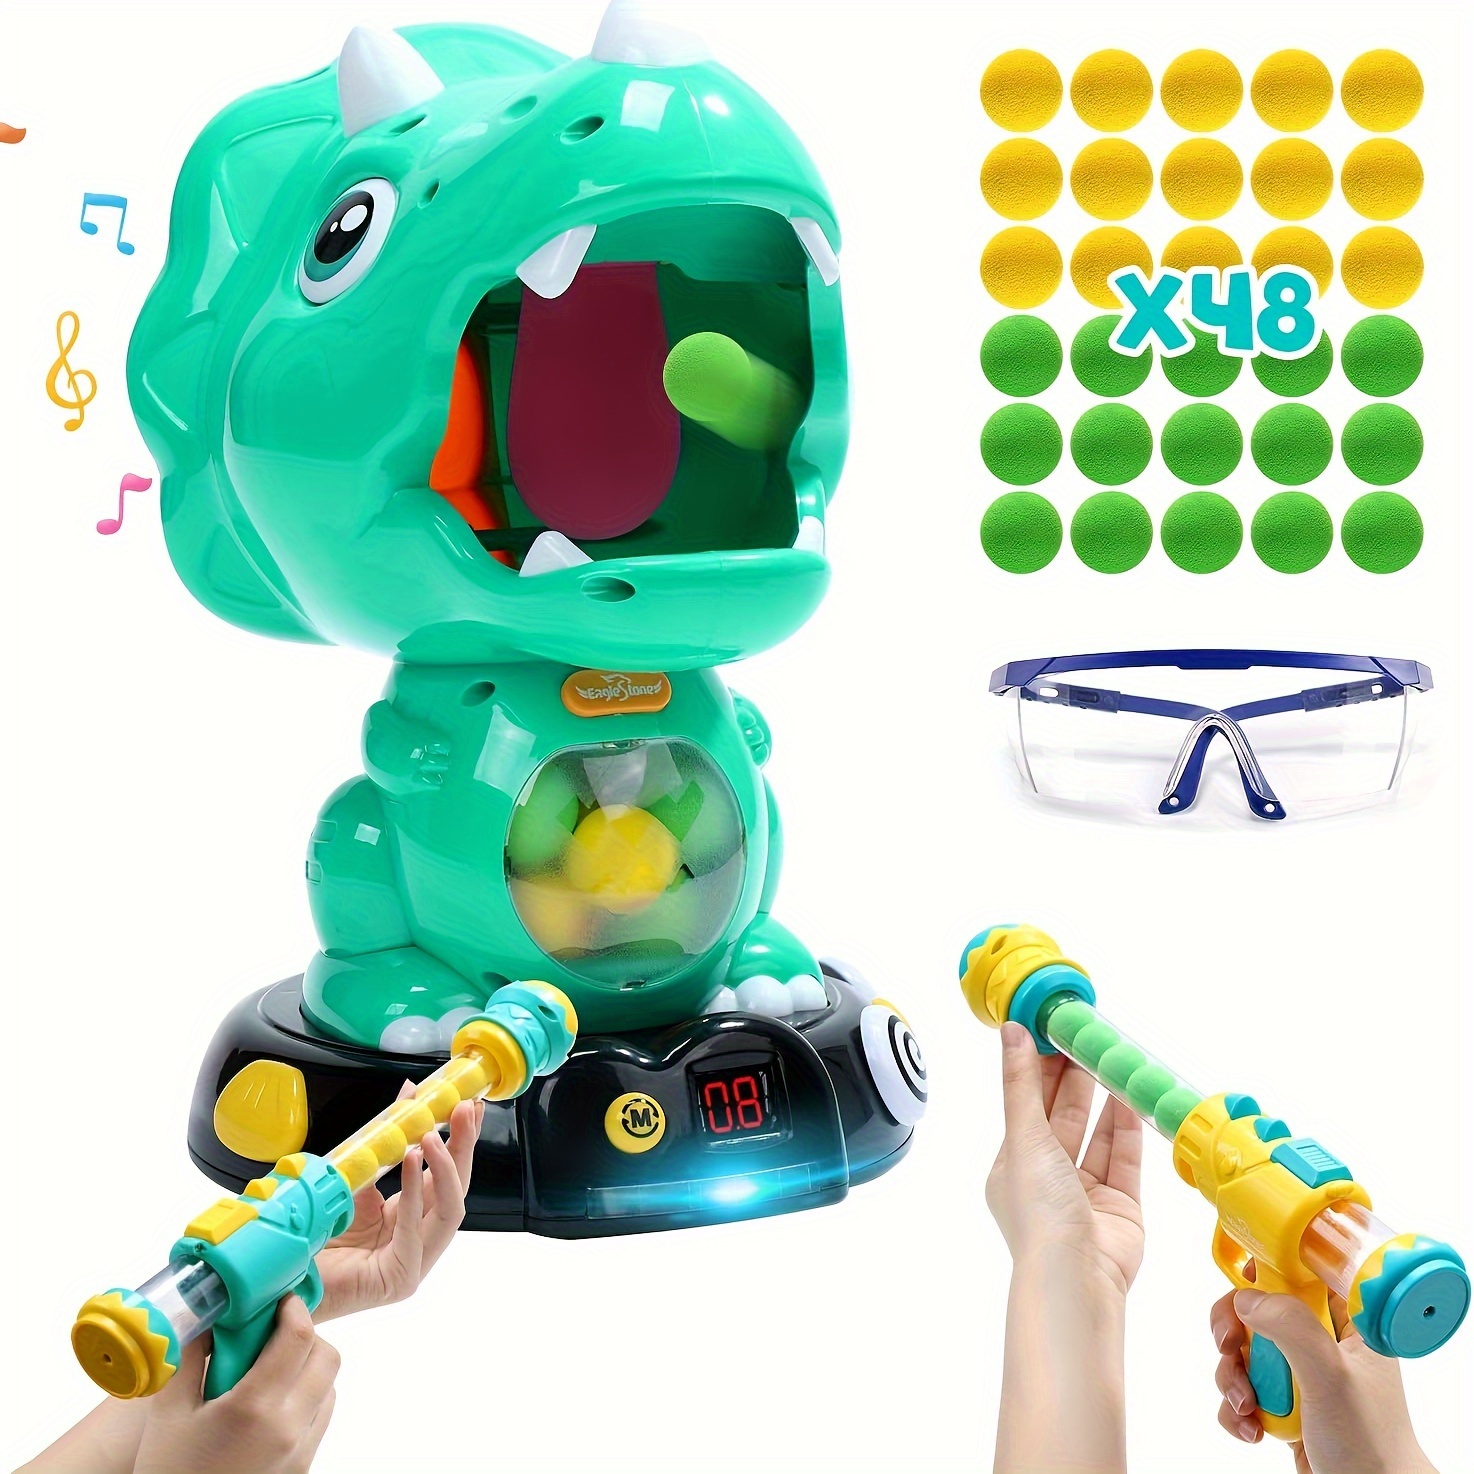 

Eaglestone Moveable Dinosaur Shooting Toys For Kids, Triceratops Dino Shooting Games With 2 Gun, 48 Balls, Lcd Score Record, For Boys And Girls, Party Favor For Indoor And Outdoor